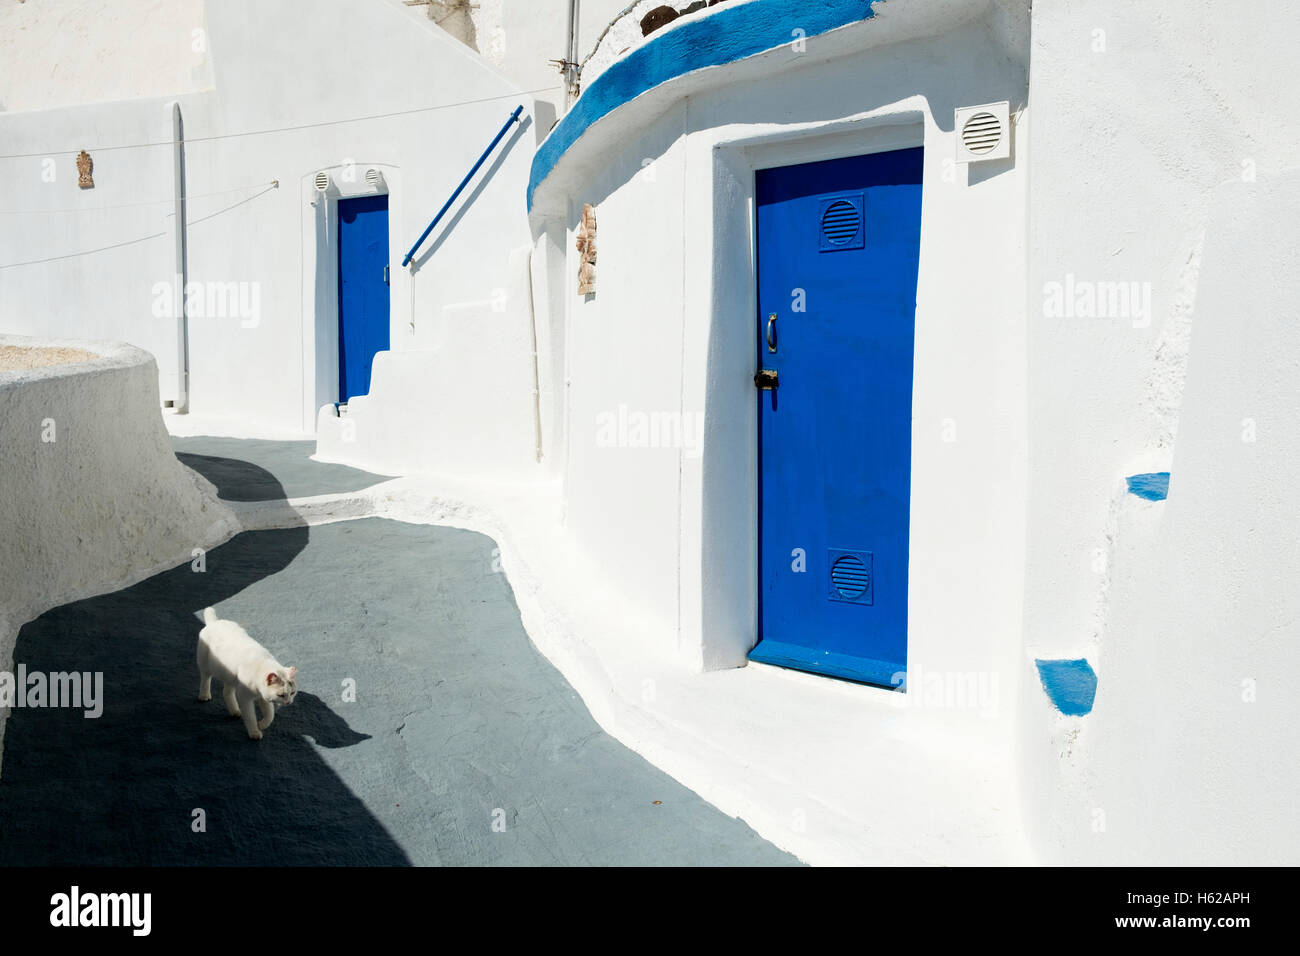 A cat walks down a grey painted street past white washed walls and blue doors in Akrotiri, Santorini, Greece. Stock Photo